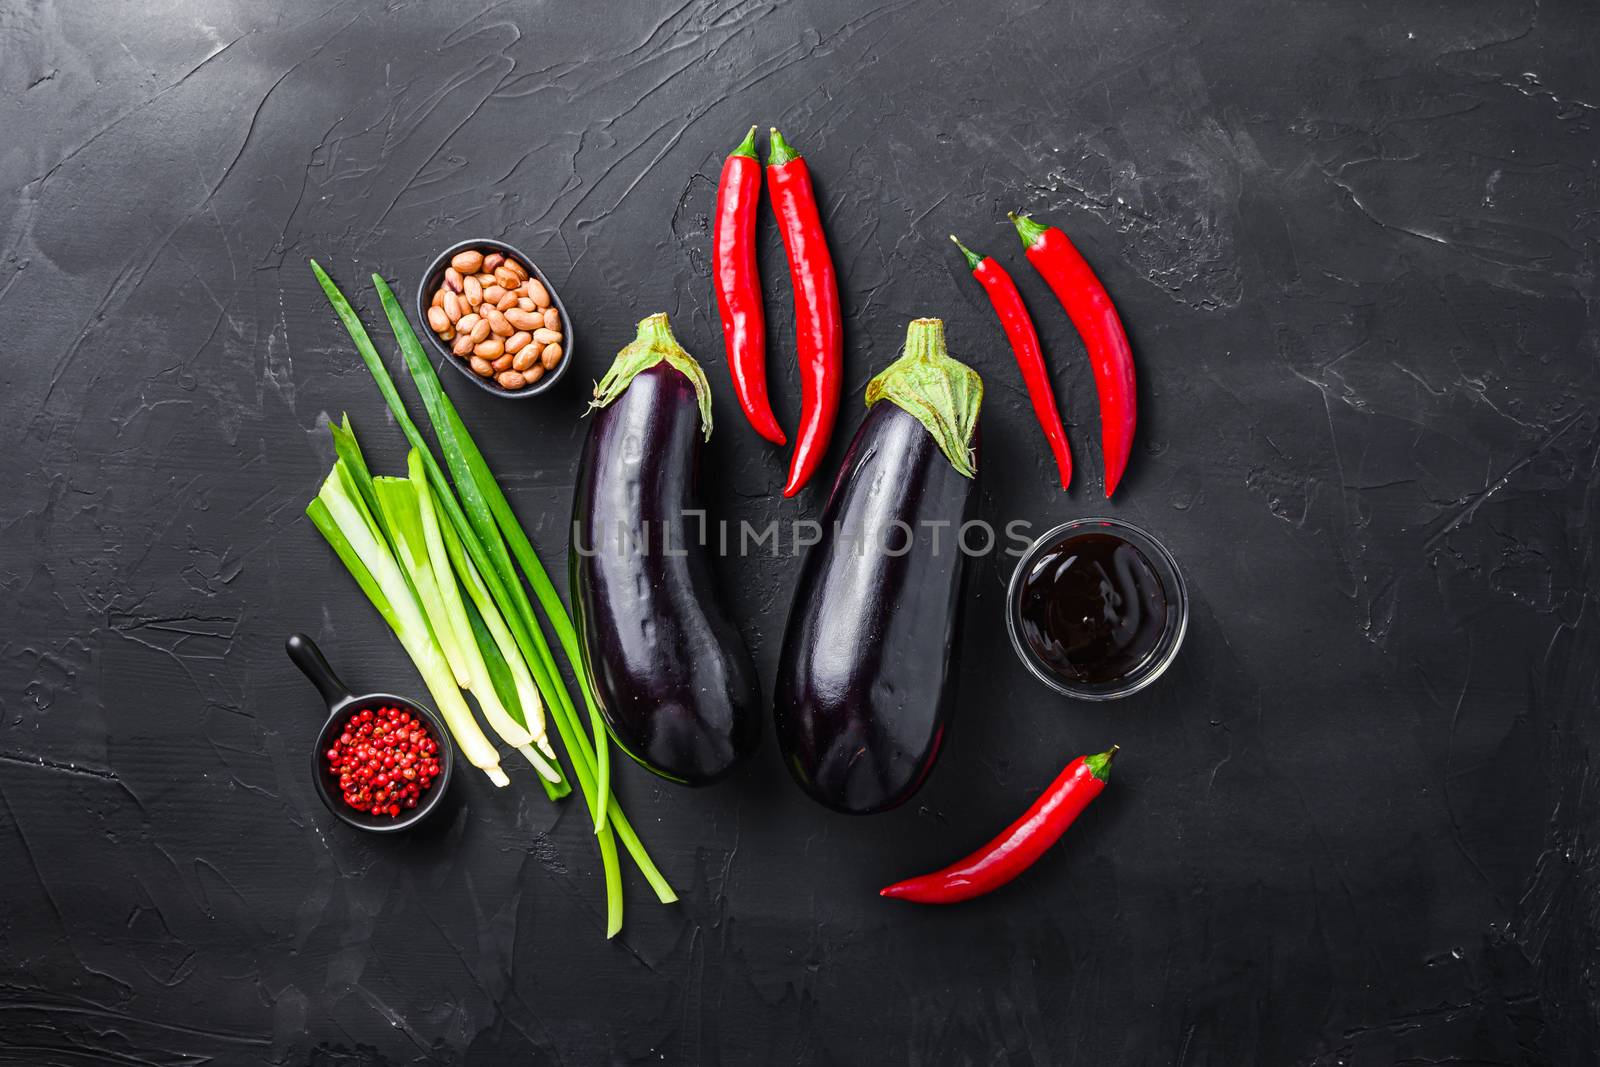 Sticky teriyaki aubergine ingredients, for cooking or grill chili pepper, eggplant, sauce, nuts on black background by Ilianesolenyi